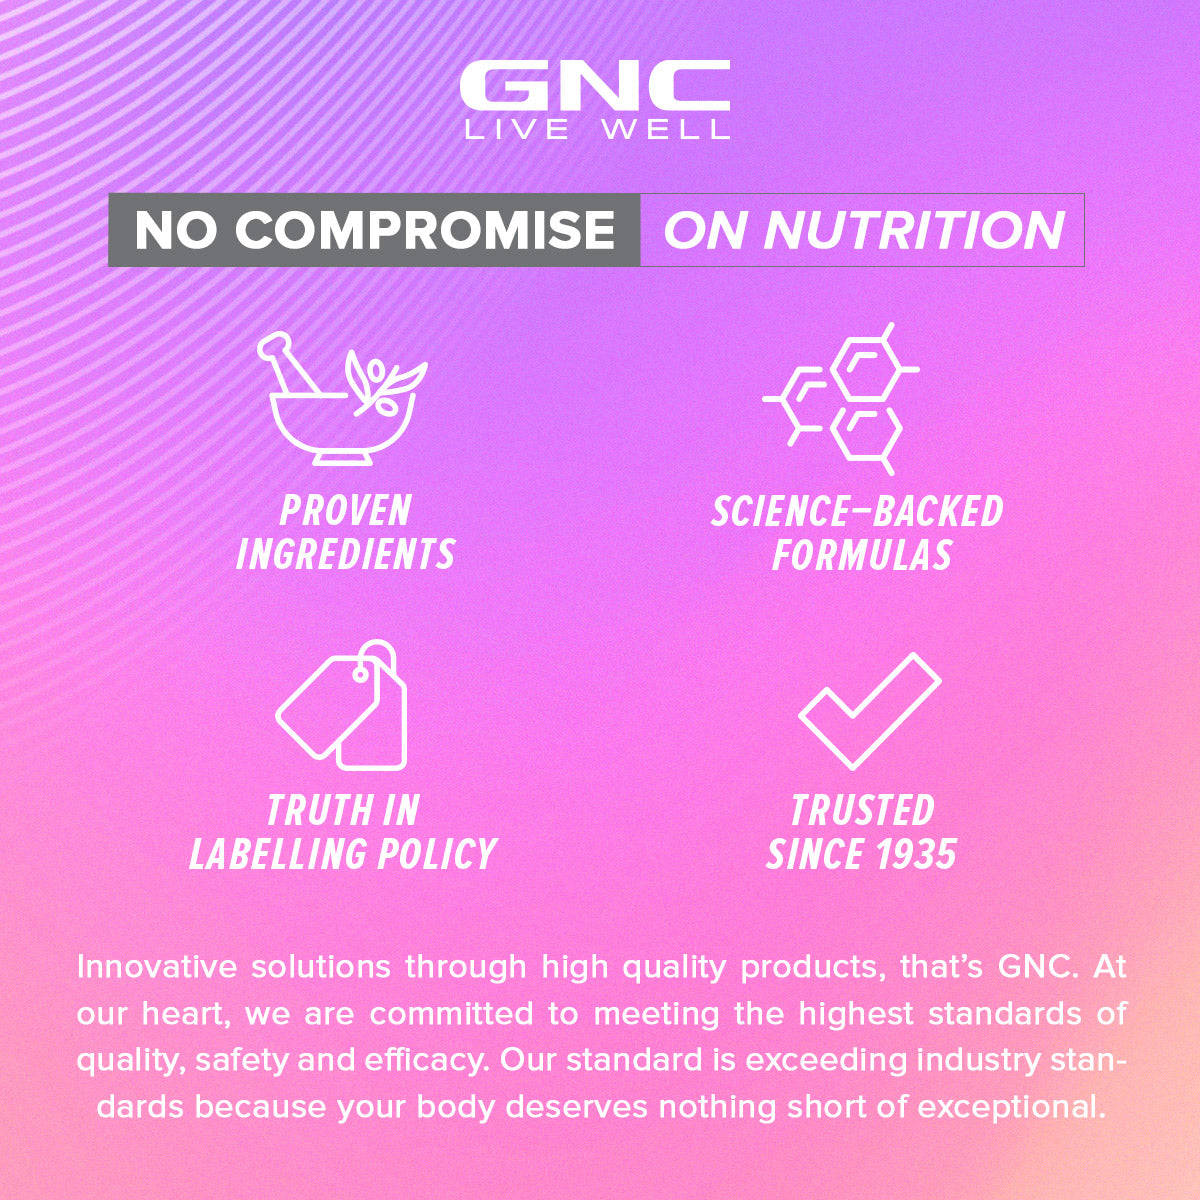 GNC Marine Collagen Powder - Reduces Fine Lines & Wrinkles For Youthful Skin